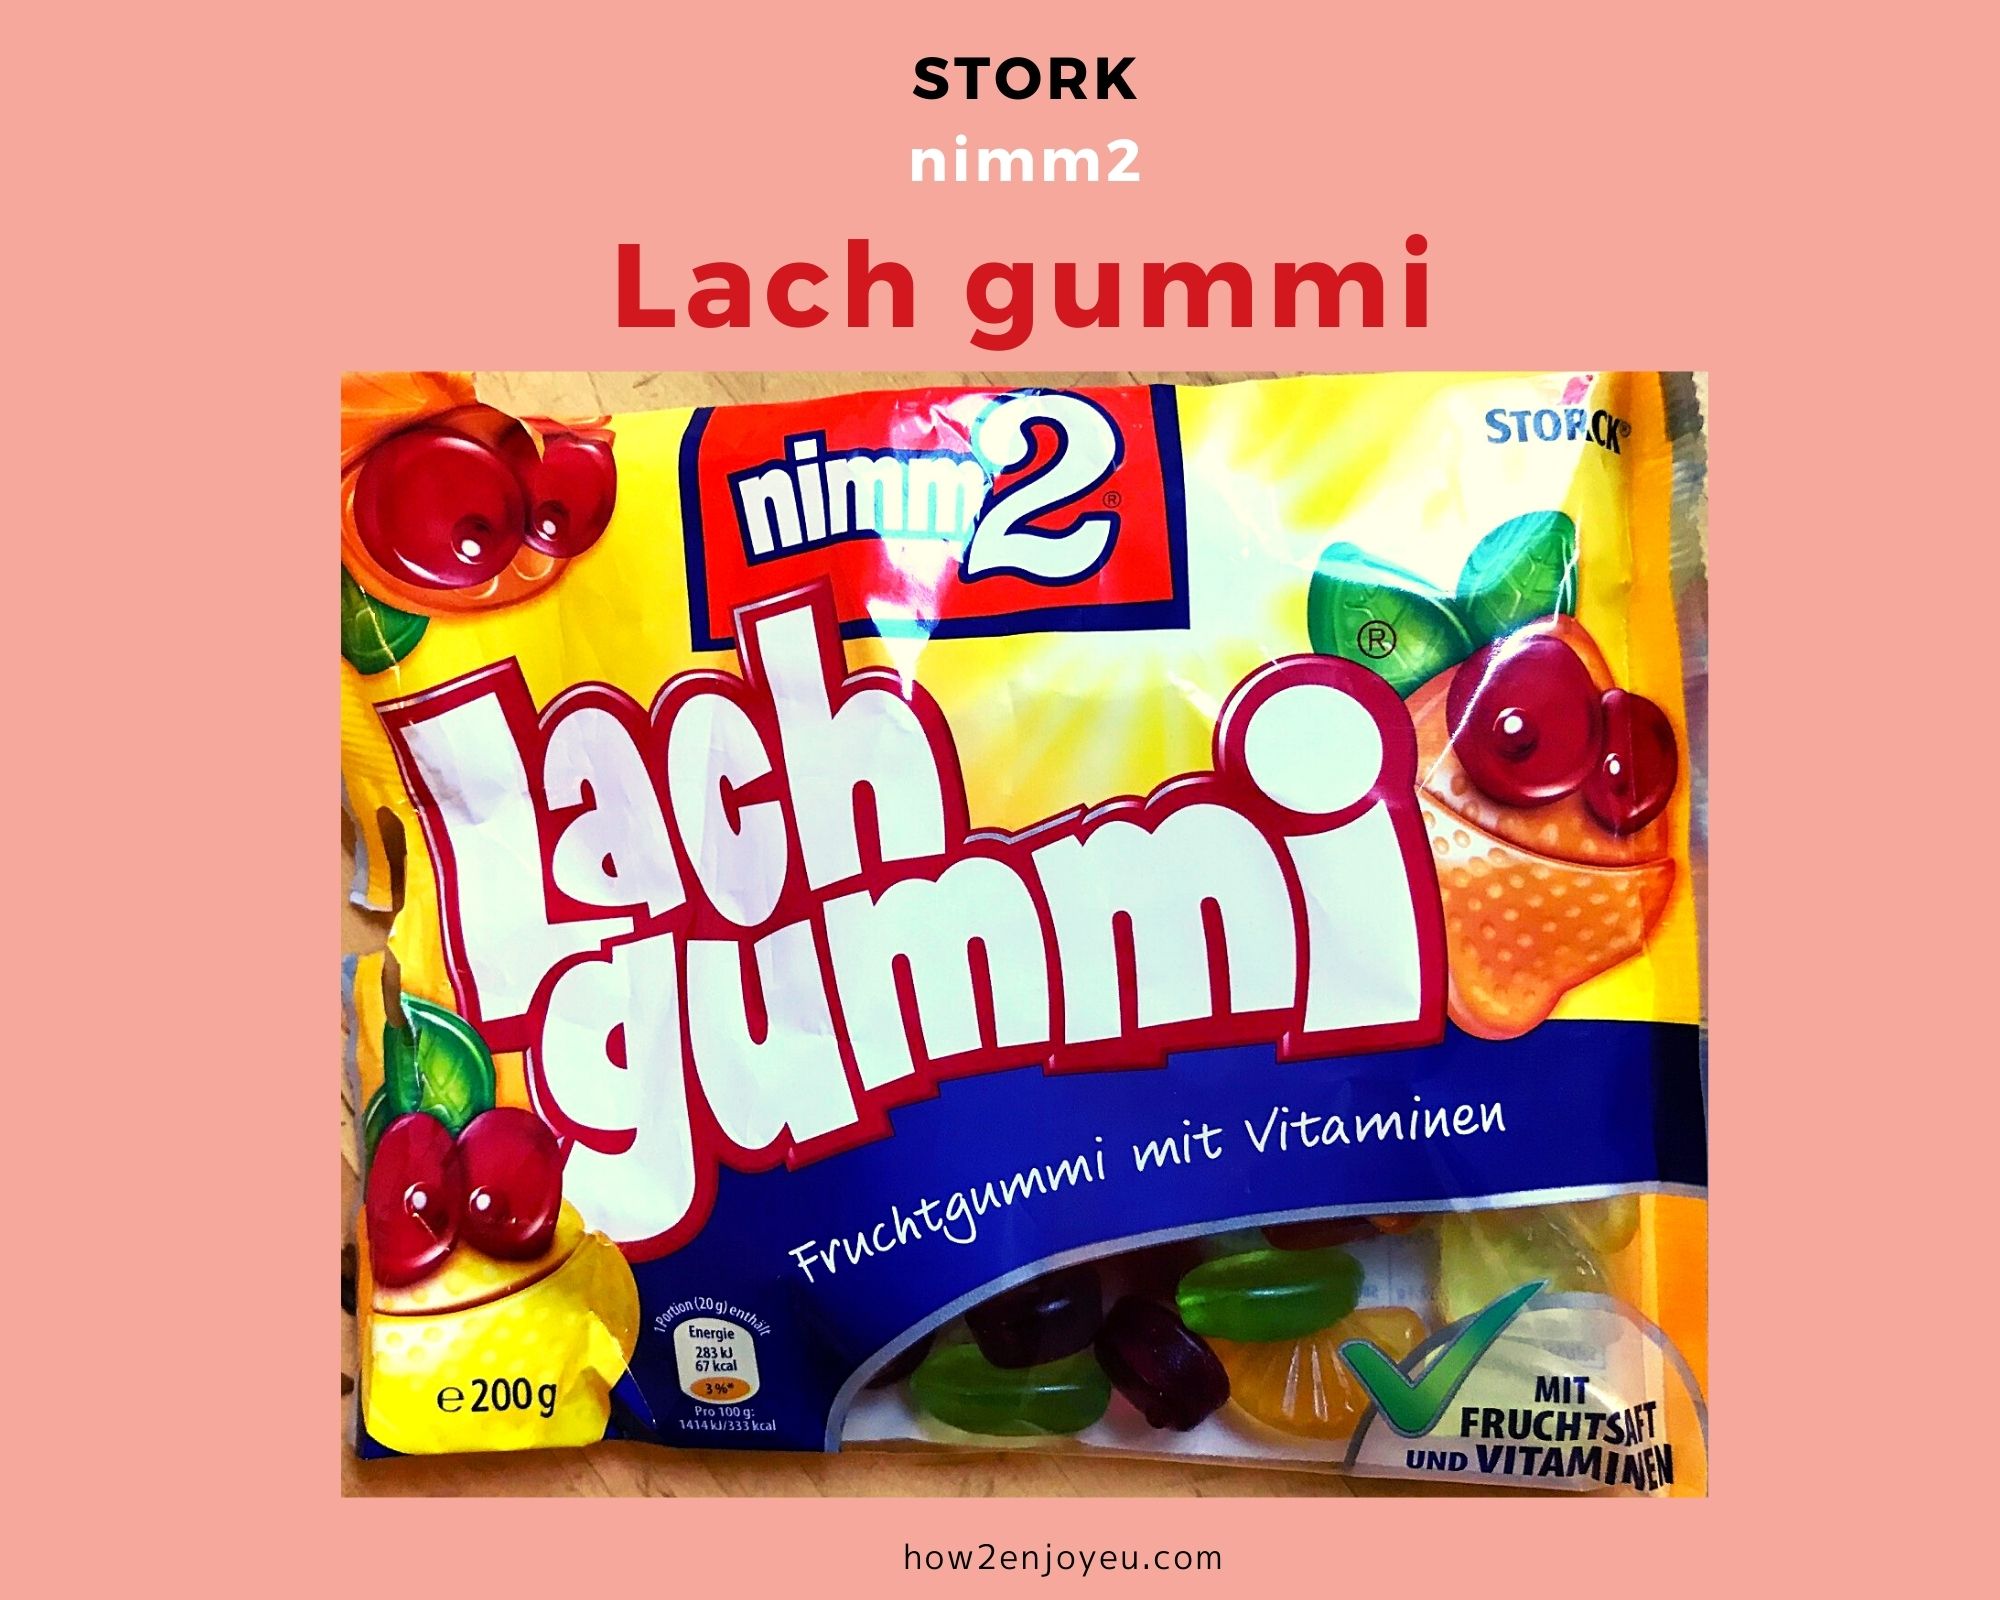 You are currently viewing ストーク社の看板商品、【nimm2 Lach gummi】